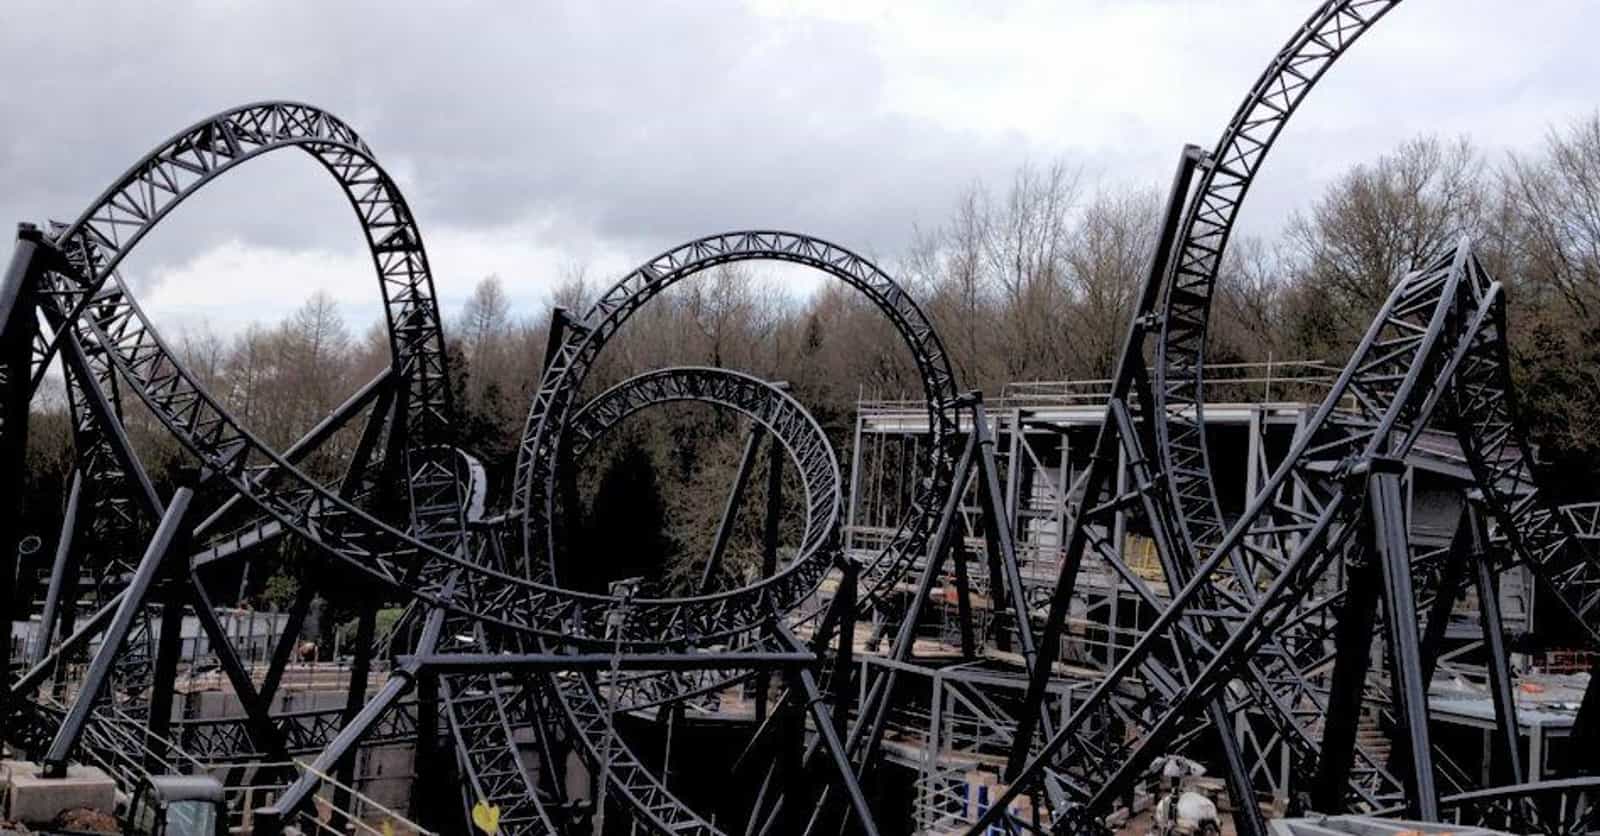 The Most Ludicrously Reckless Theme Park Rides Ever Created